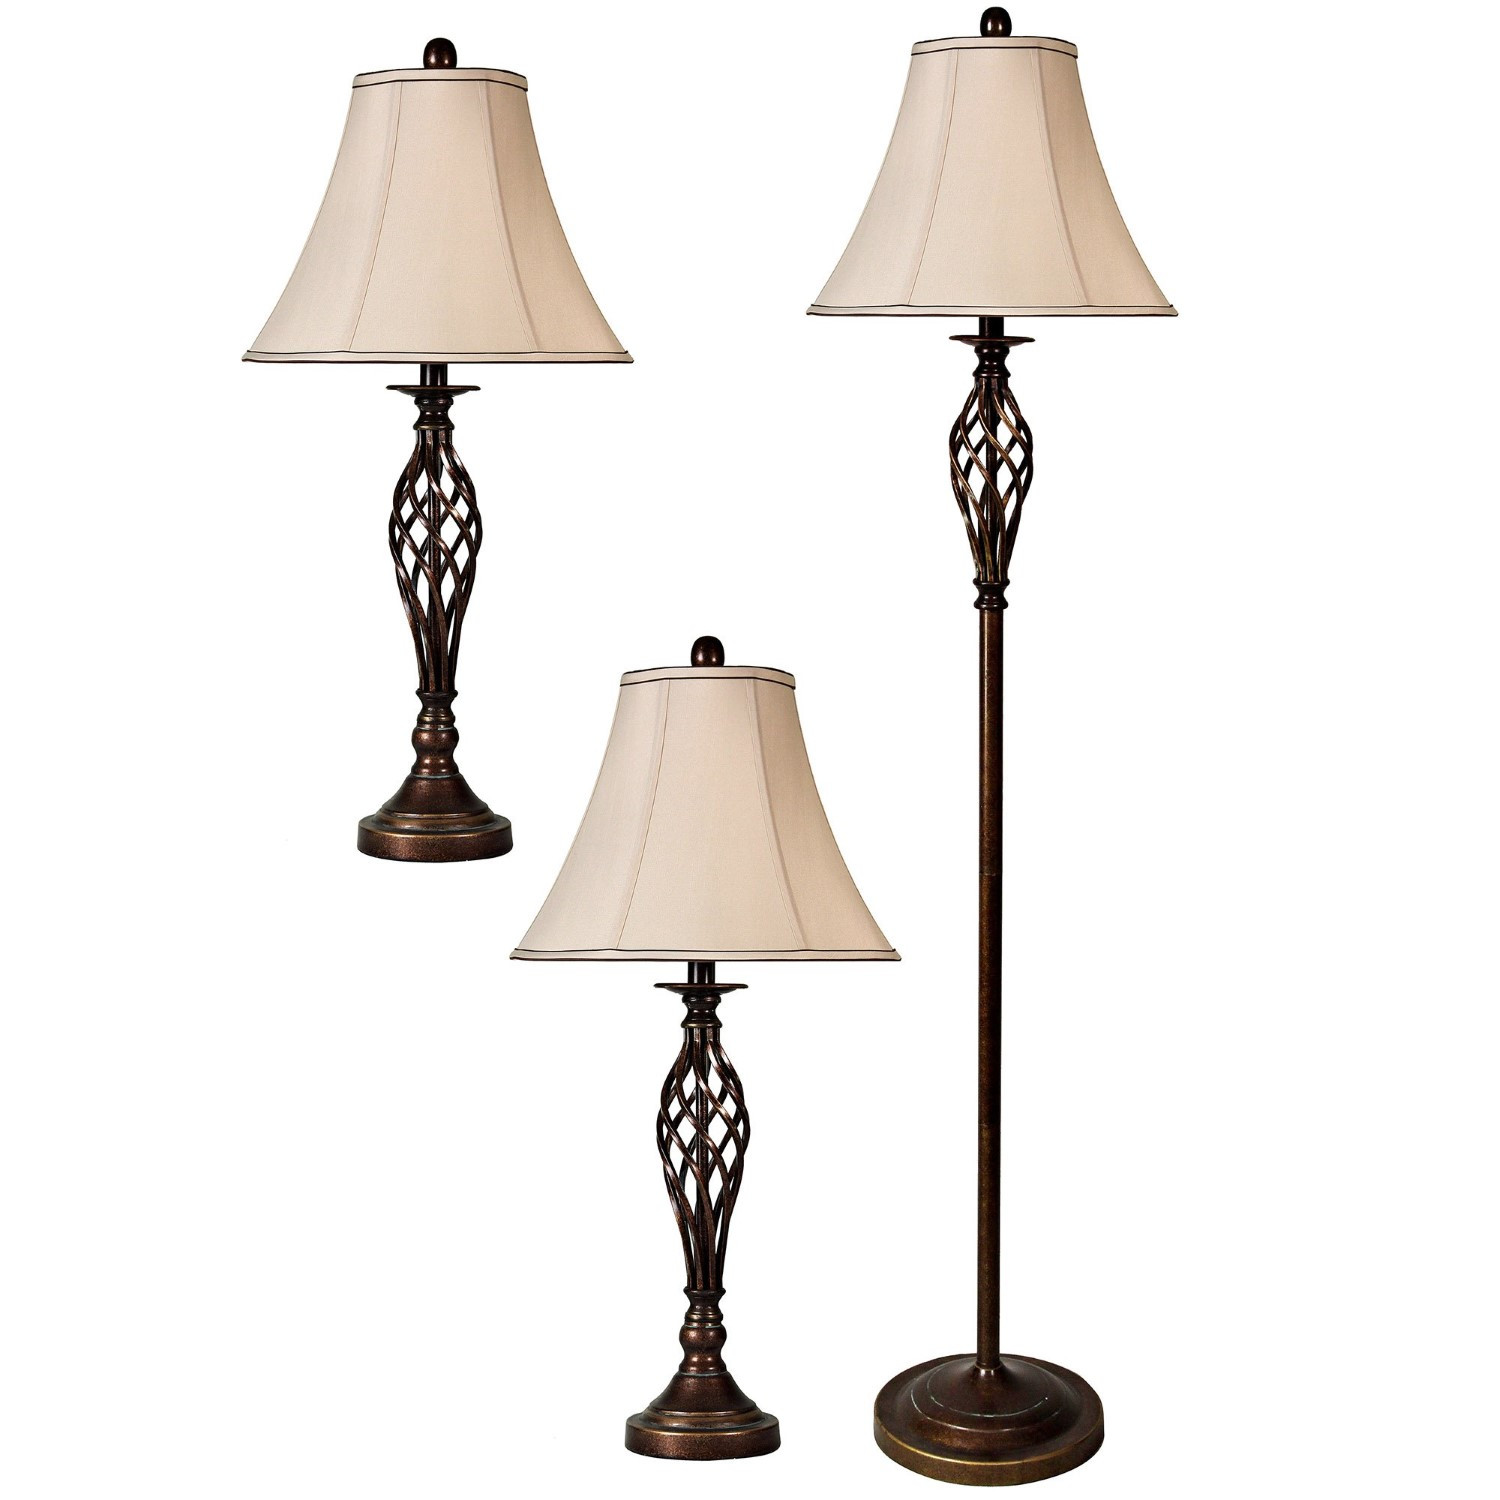 Living Room Table Lamp Sets
 StyleCraft Barclay Brass 3 Piece Living Room Accent Table